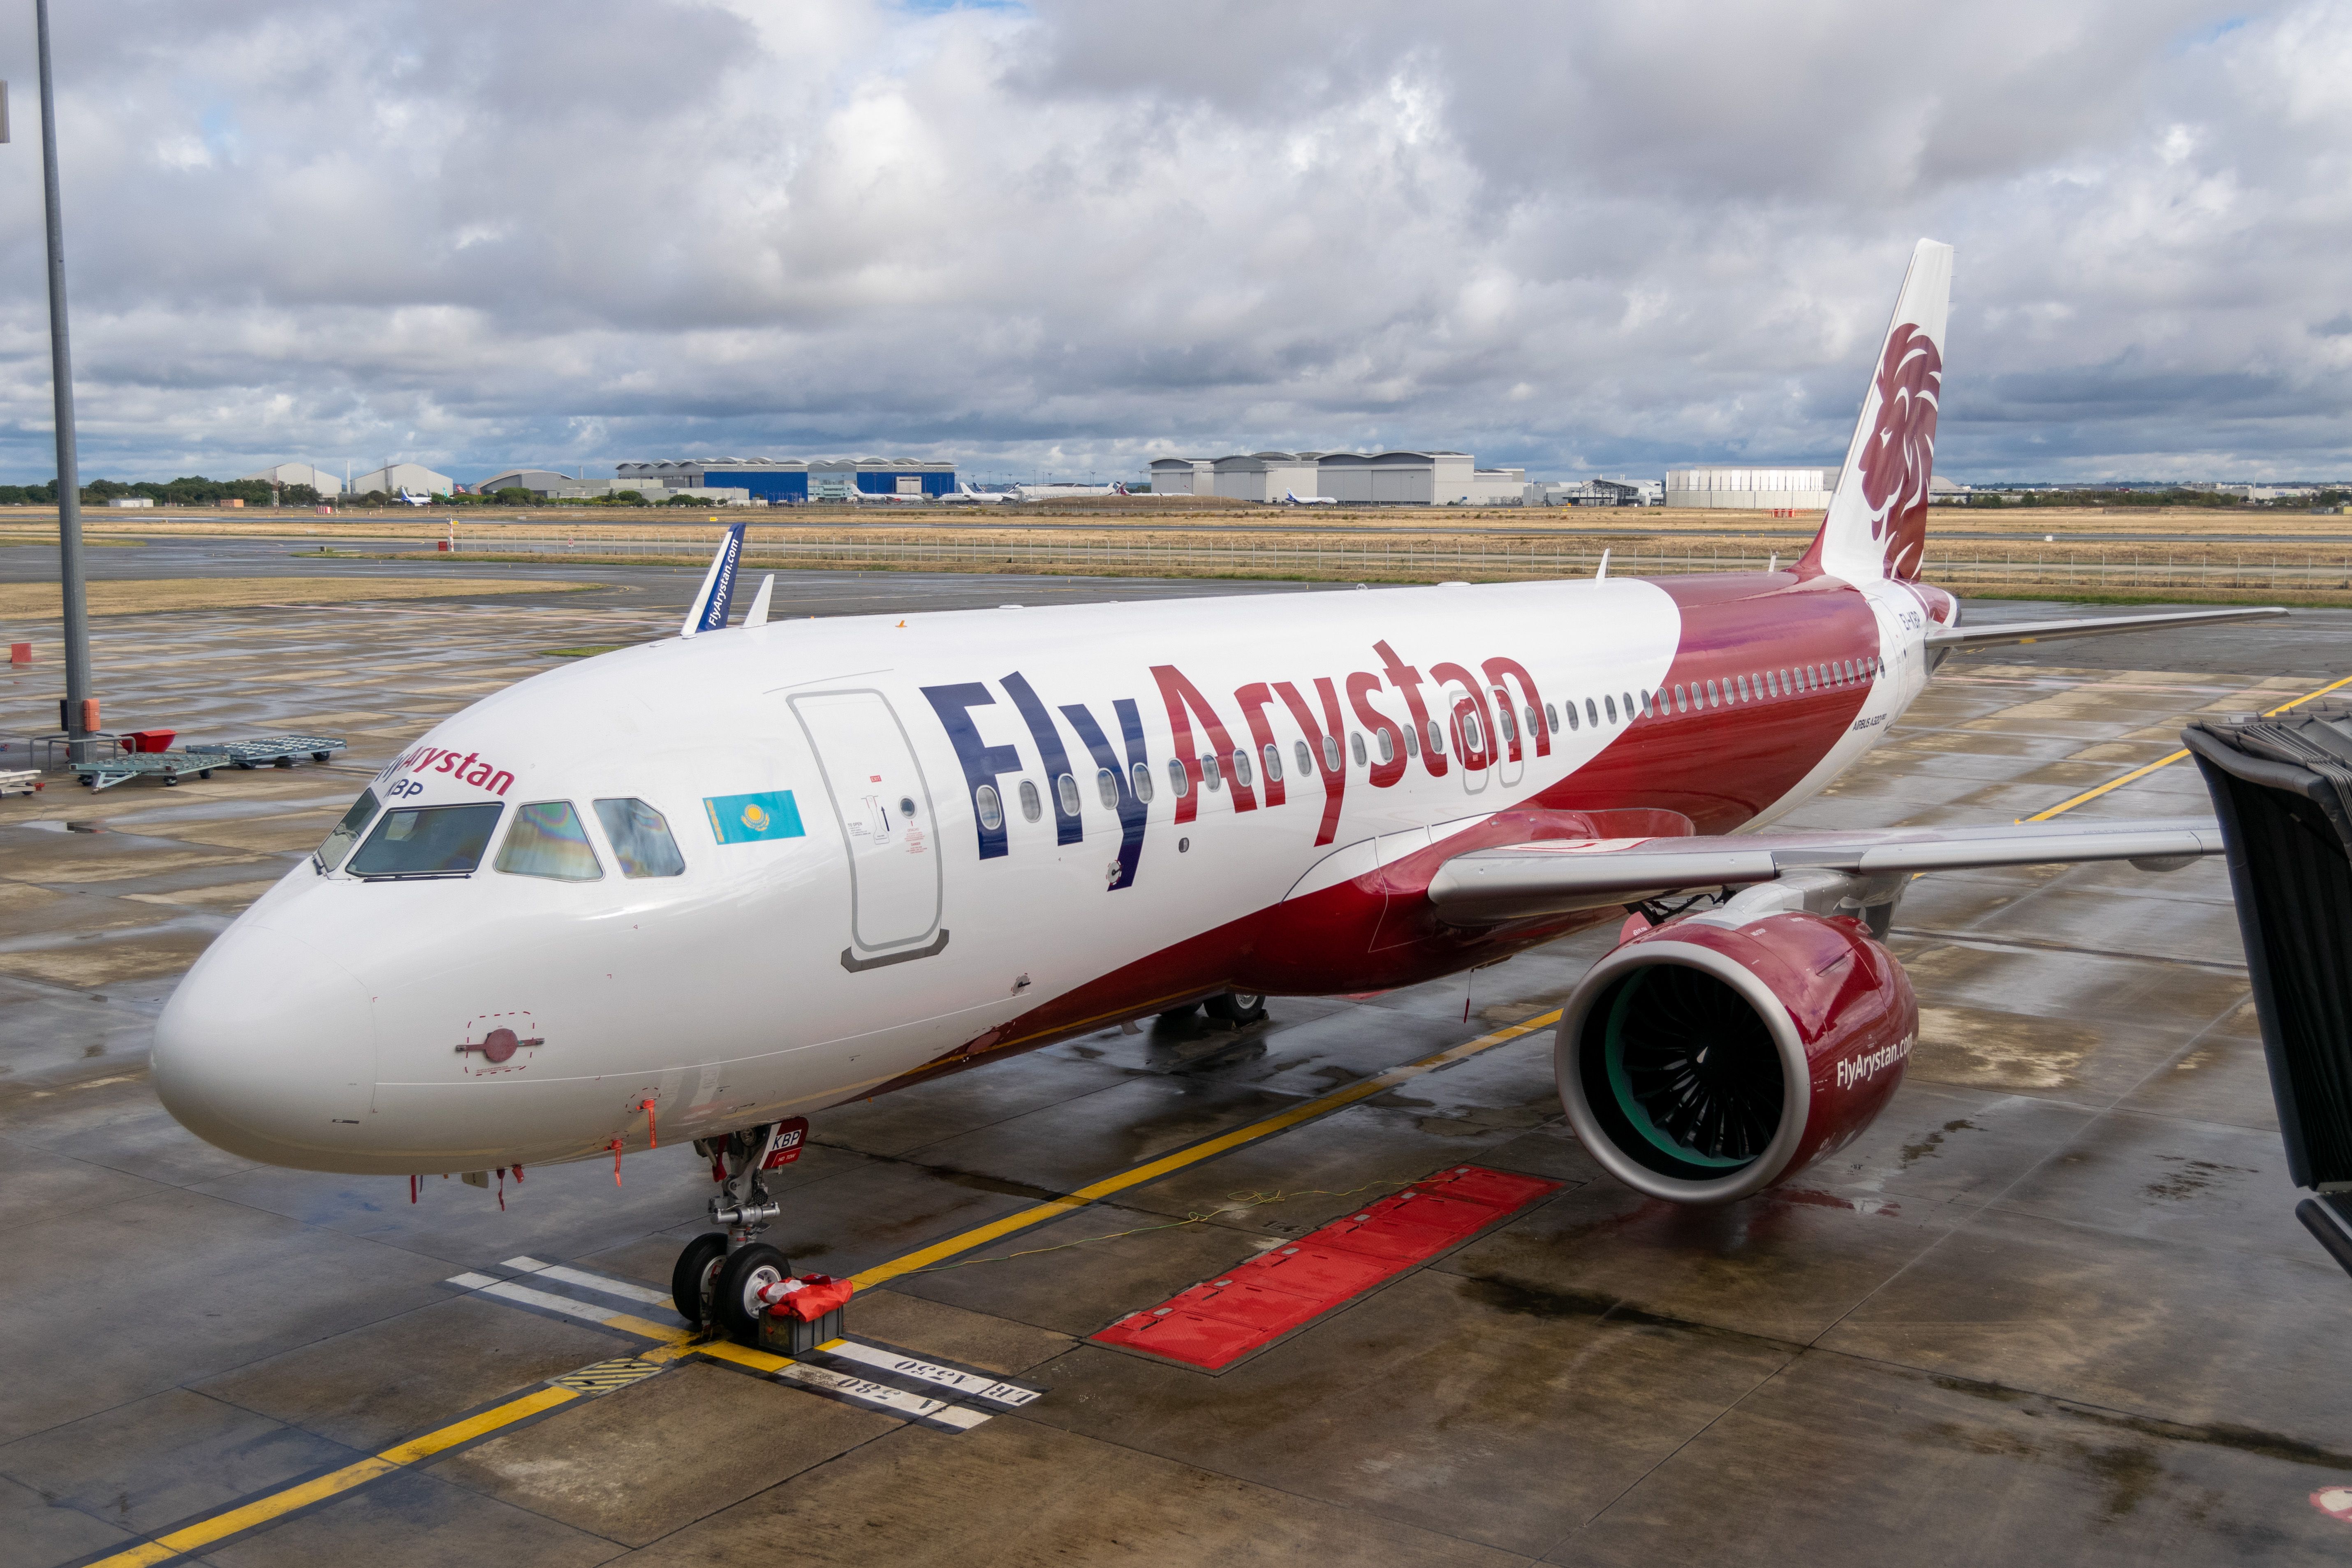 FLyArystan A320neo at delivery center